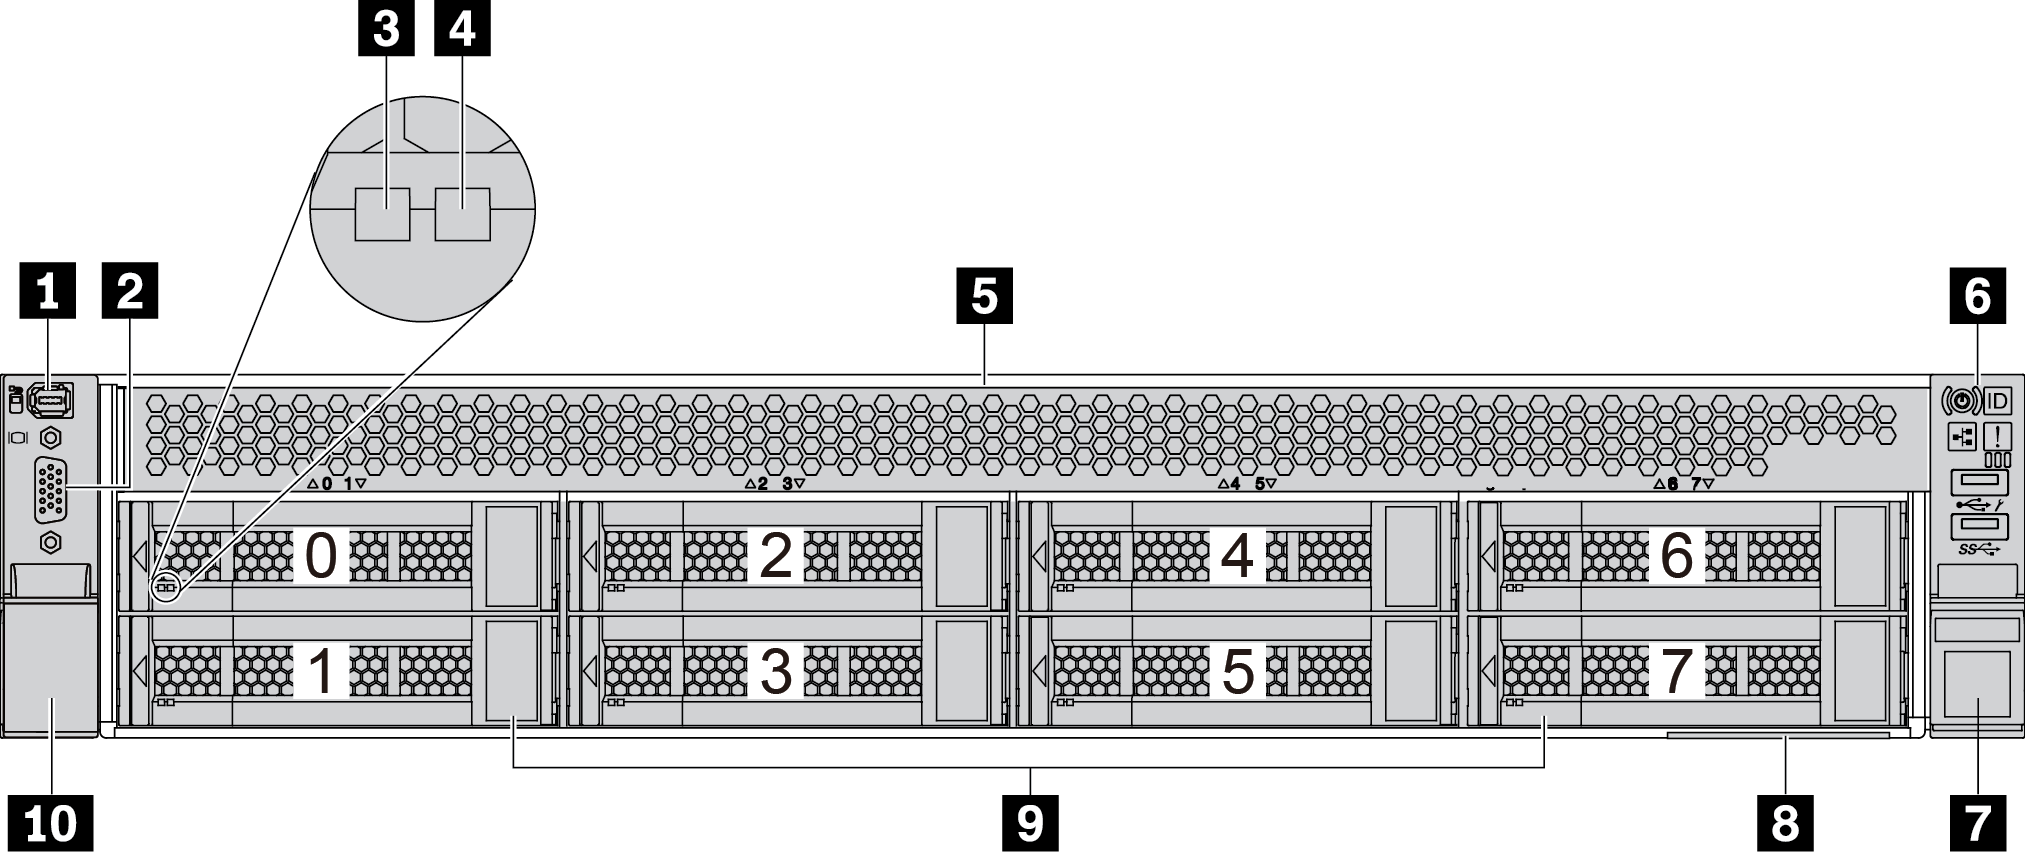 Front view of server models with eight 3.5-inch front drive bays